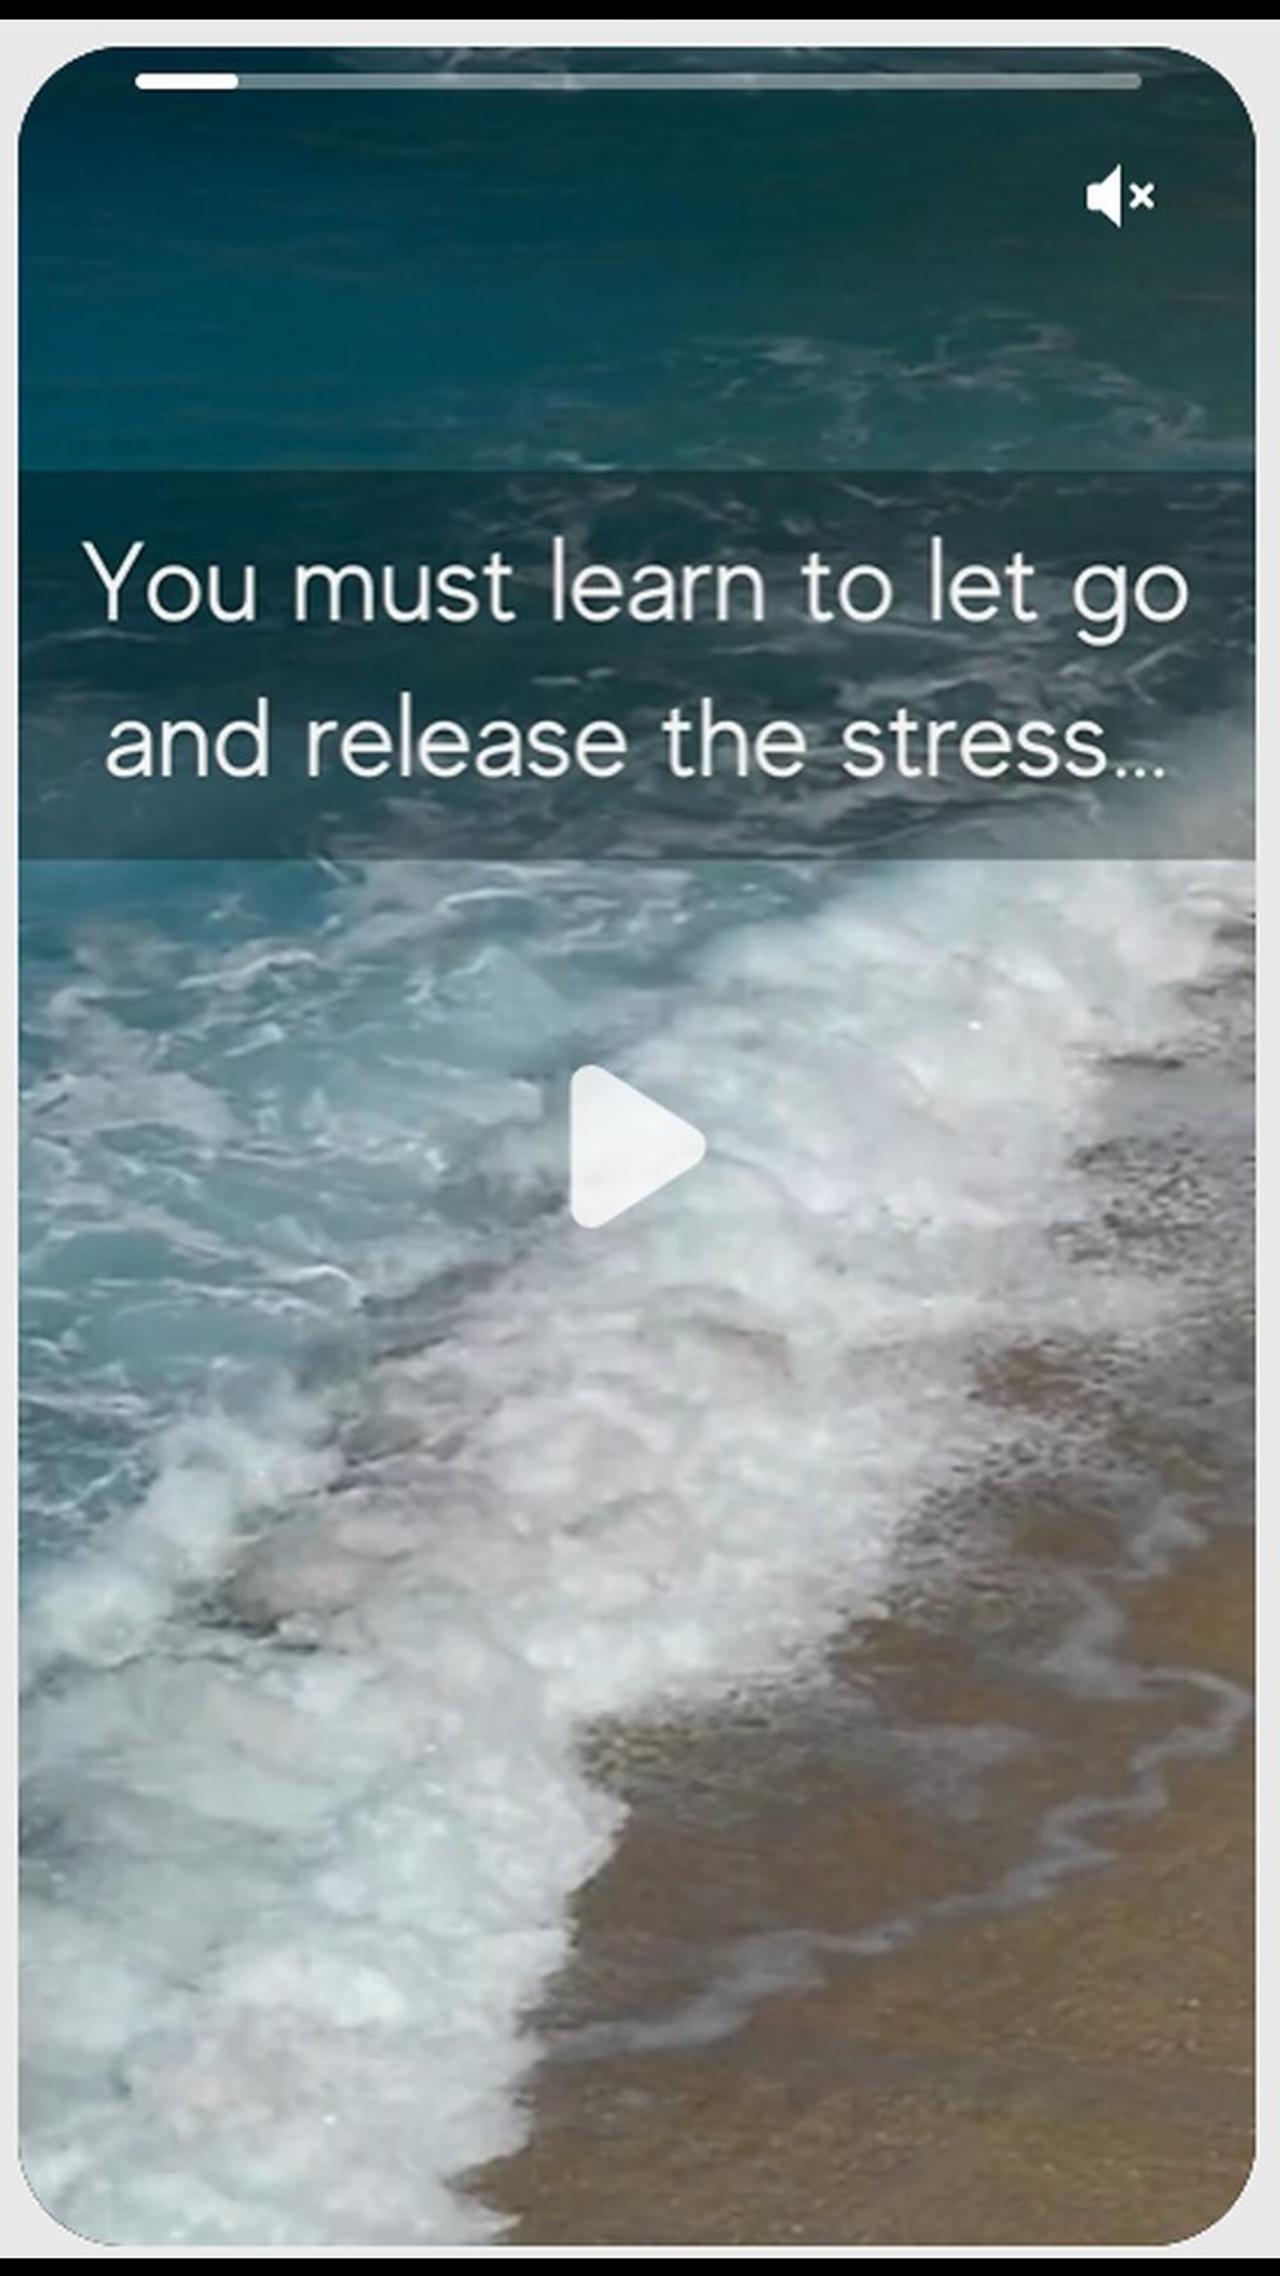 You Must Learn to Let Go and Release the Stress. You Were Never in Control Anyway.